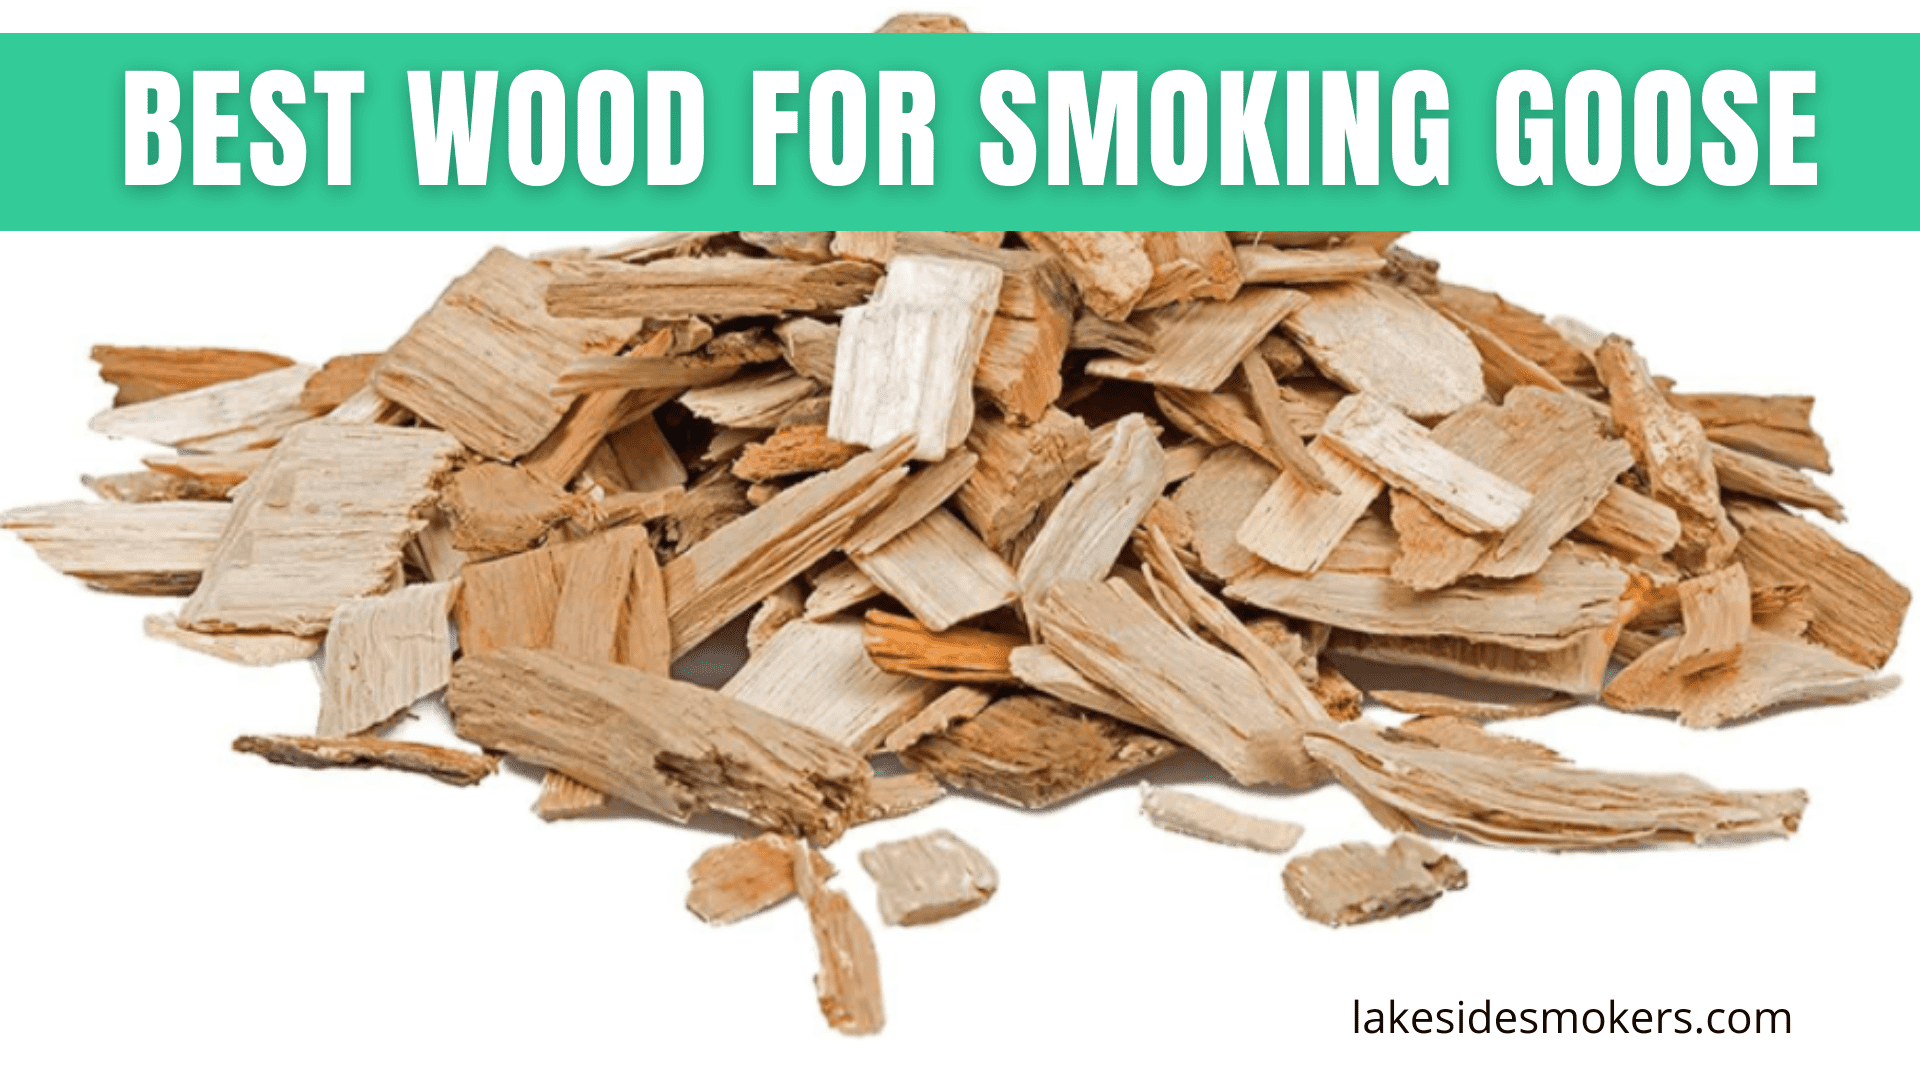 Best wood for smoking goose | Mild choices to make this meat shine